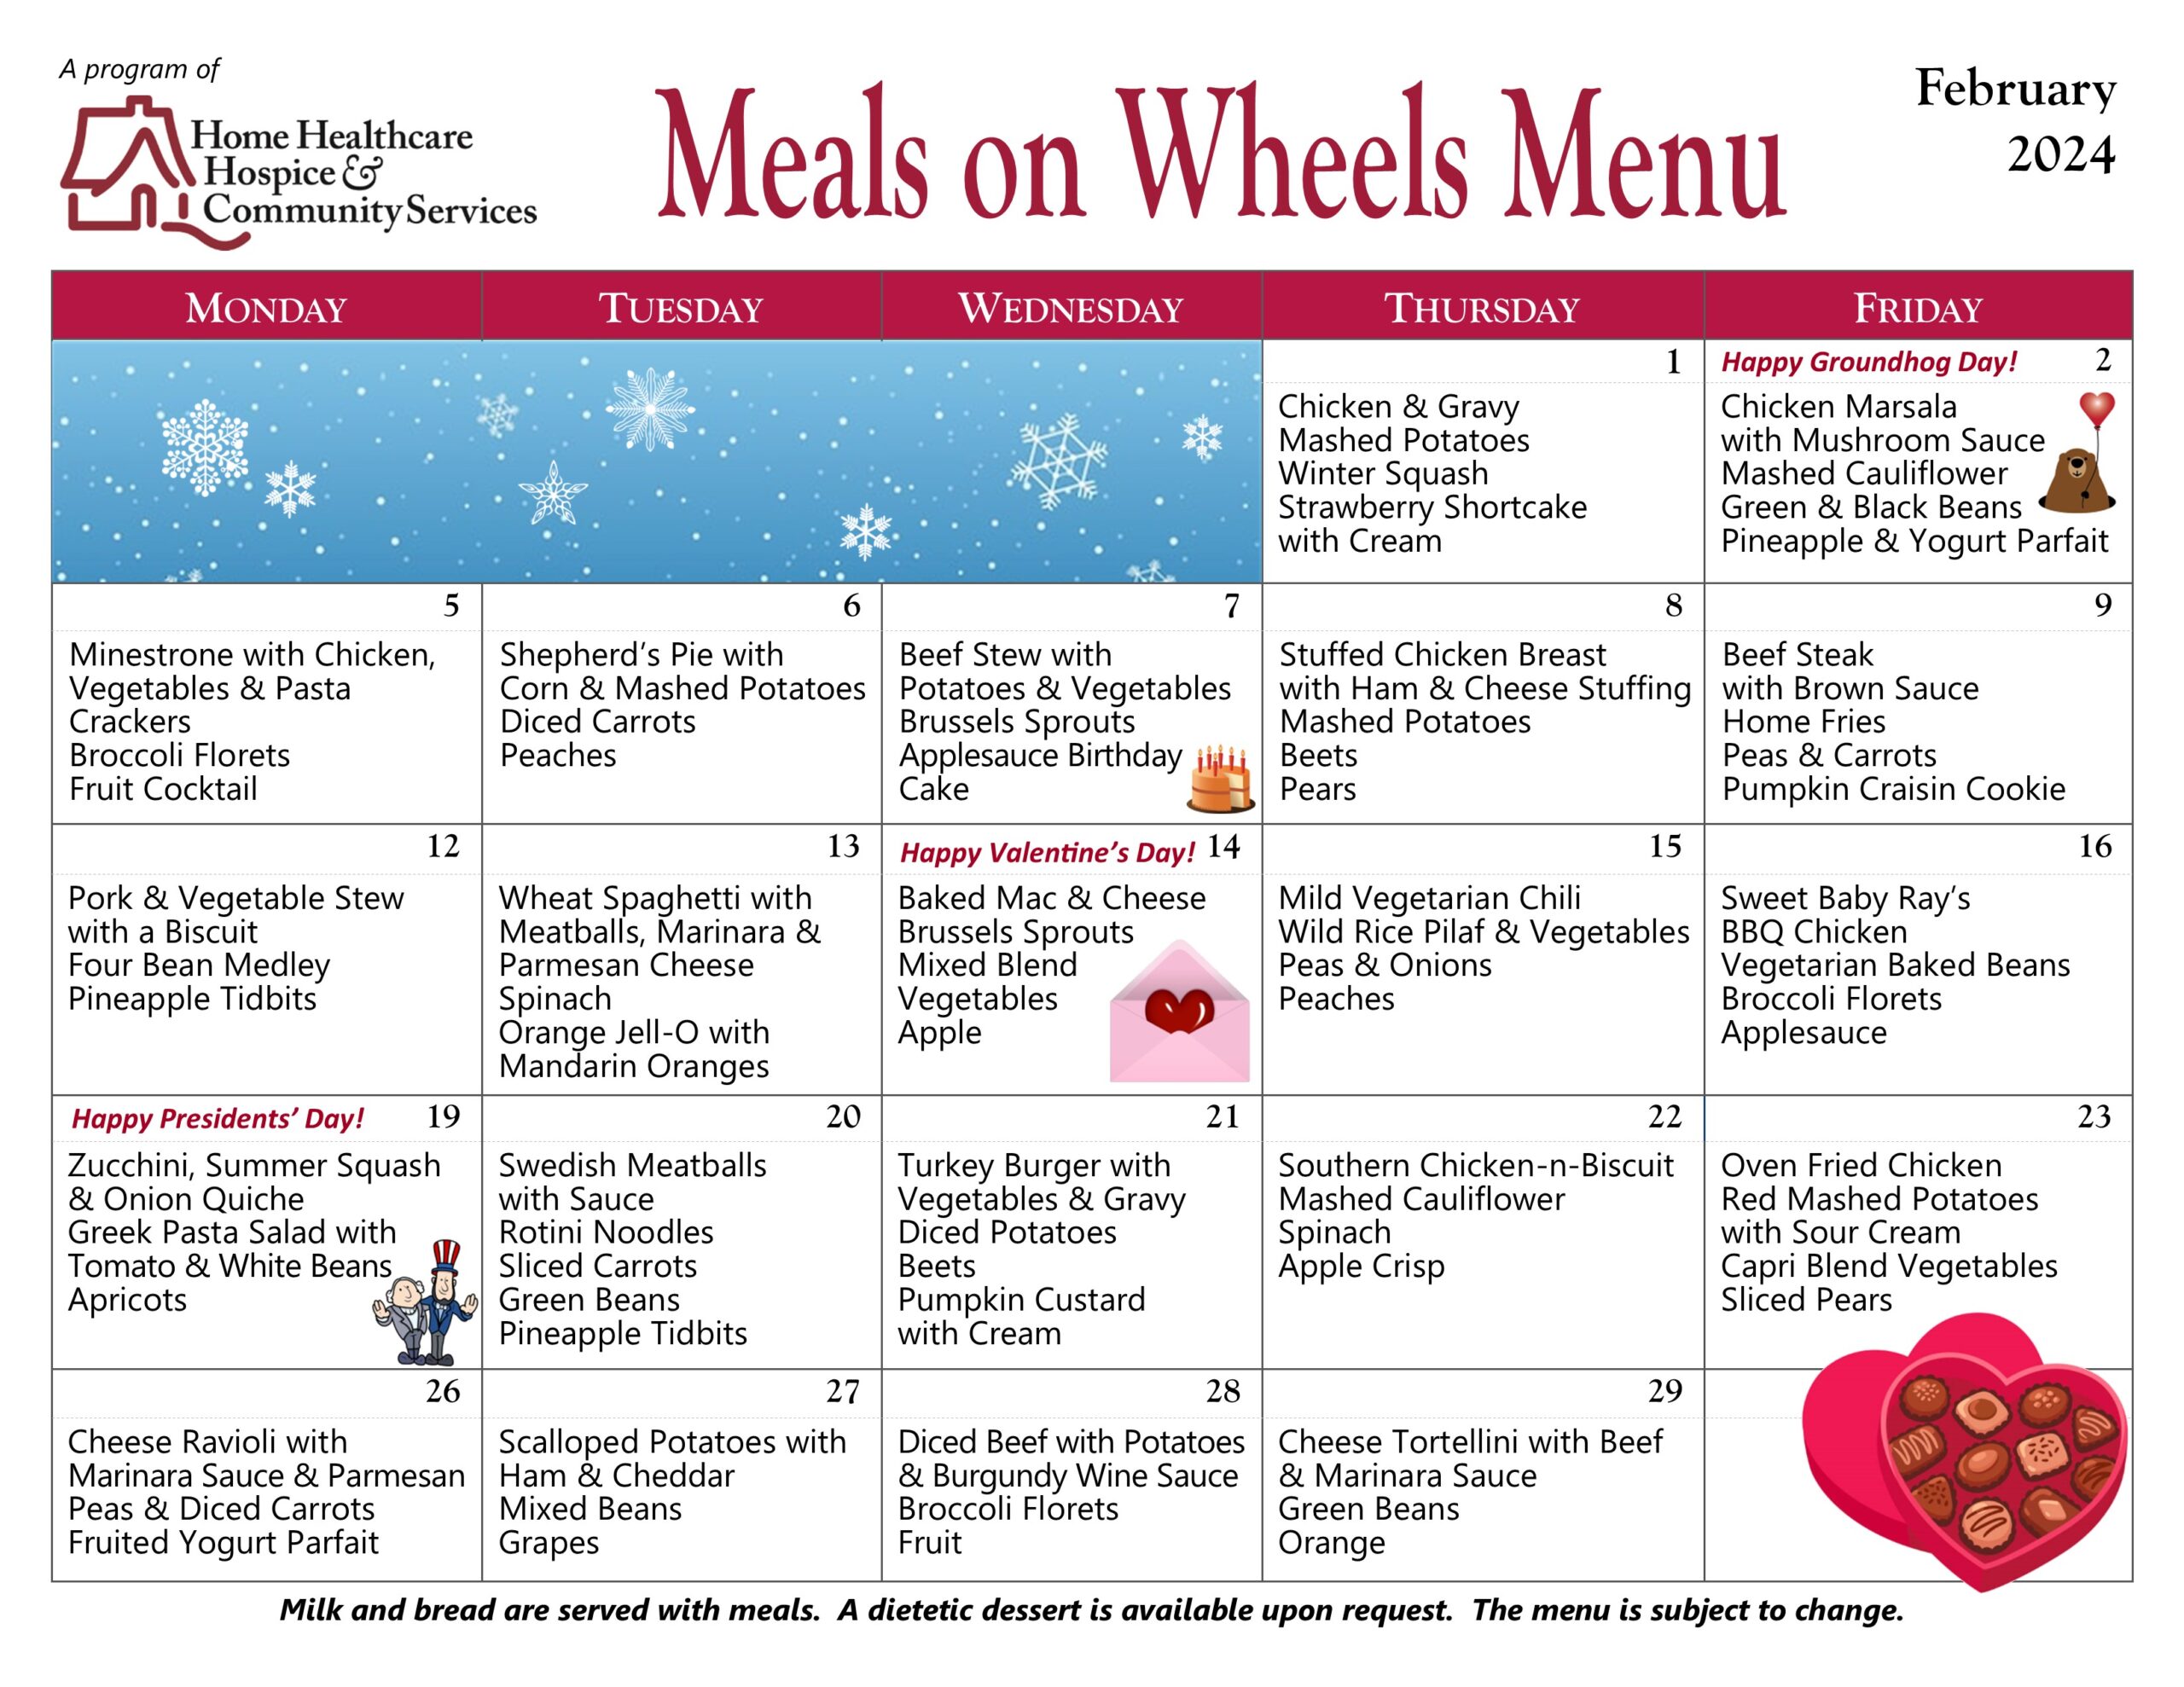 Meals On Wheels Menu for February 2024